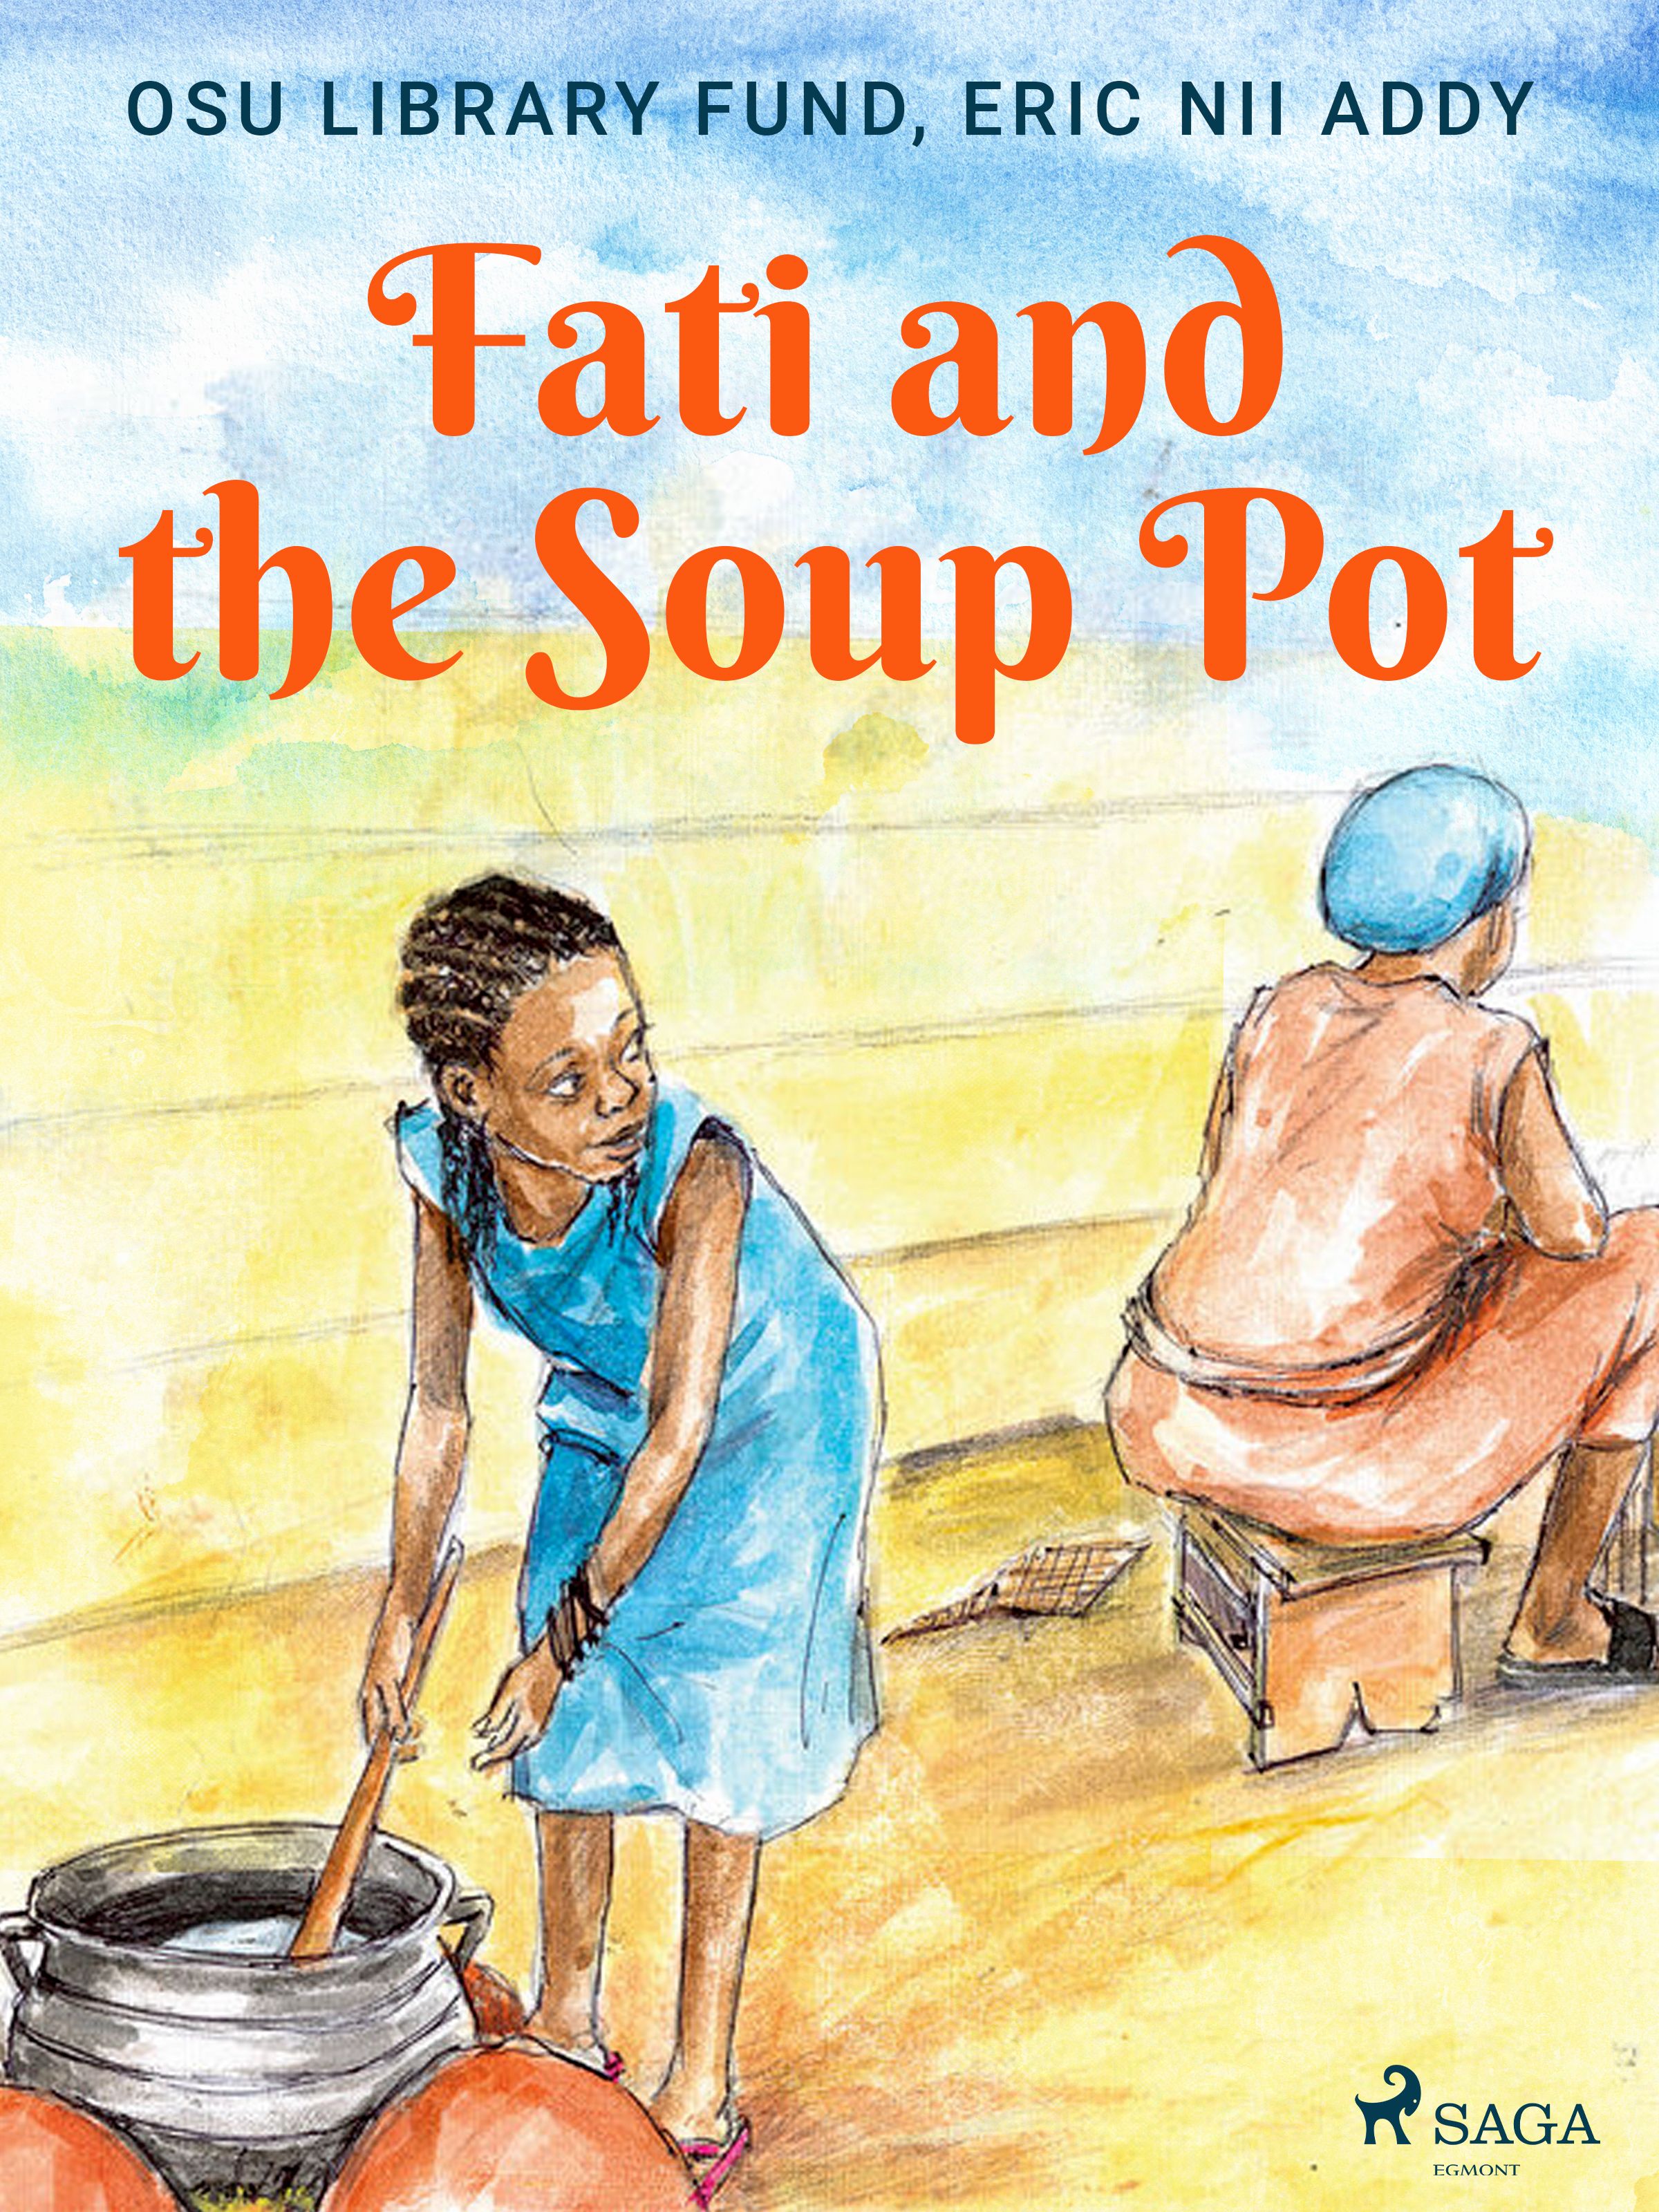 Fati and the Soup Pot, eBook by Eric Nii Addy, Osu Library Fund